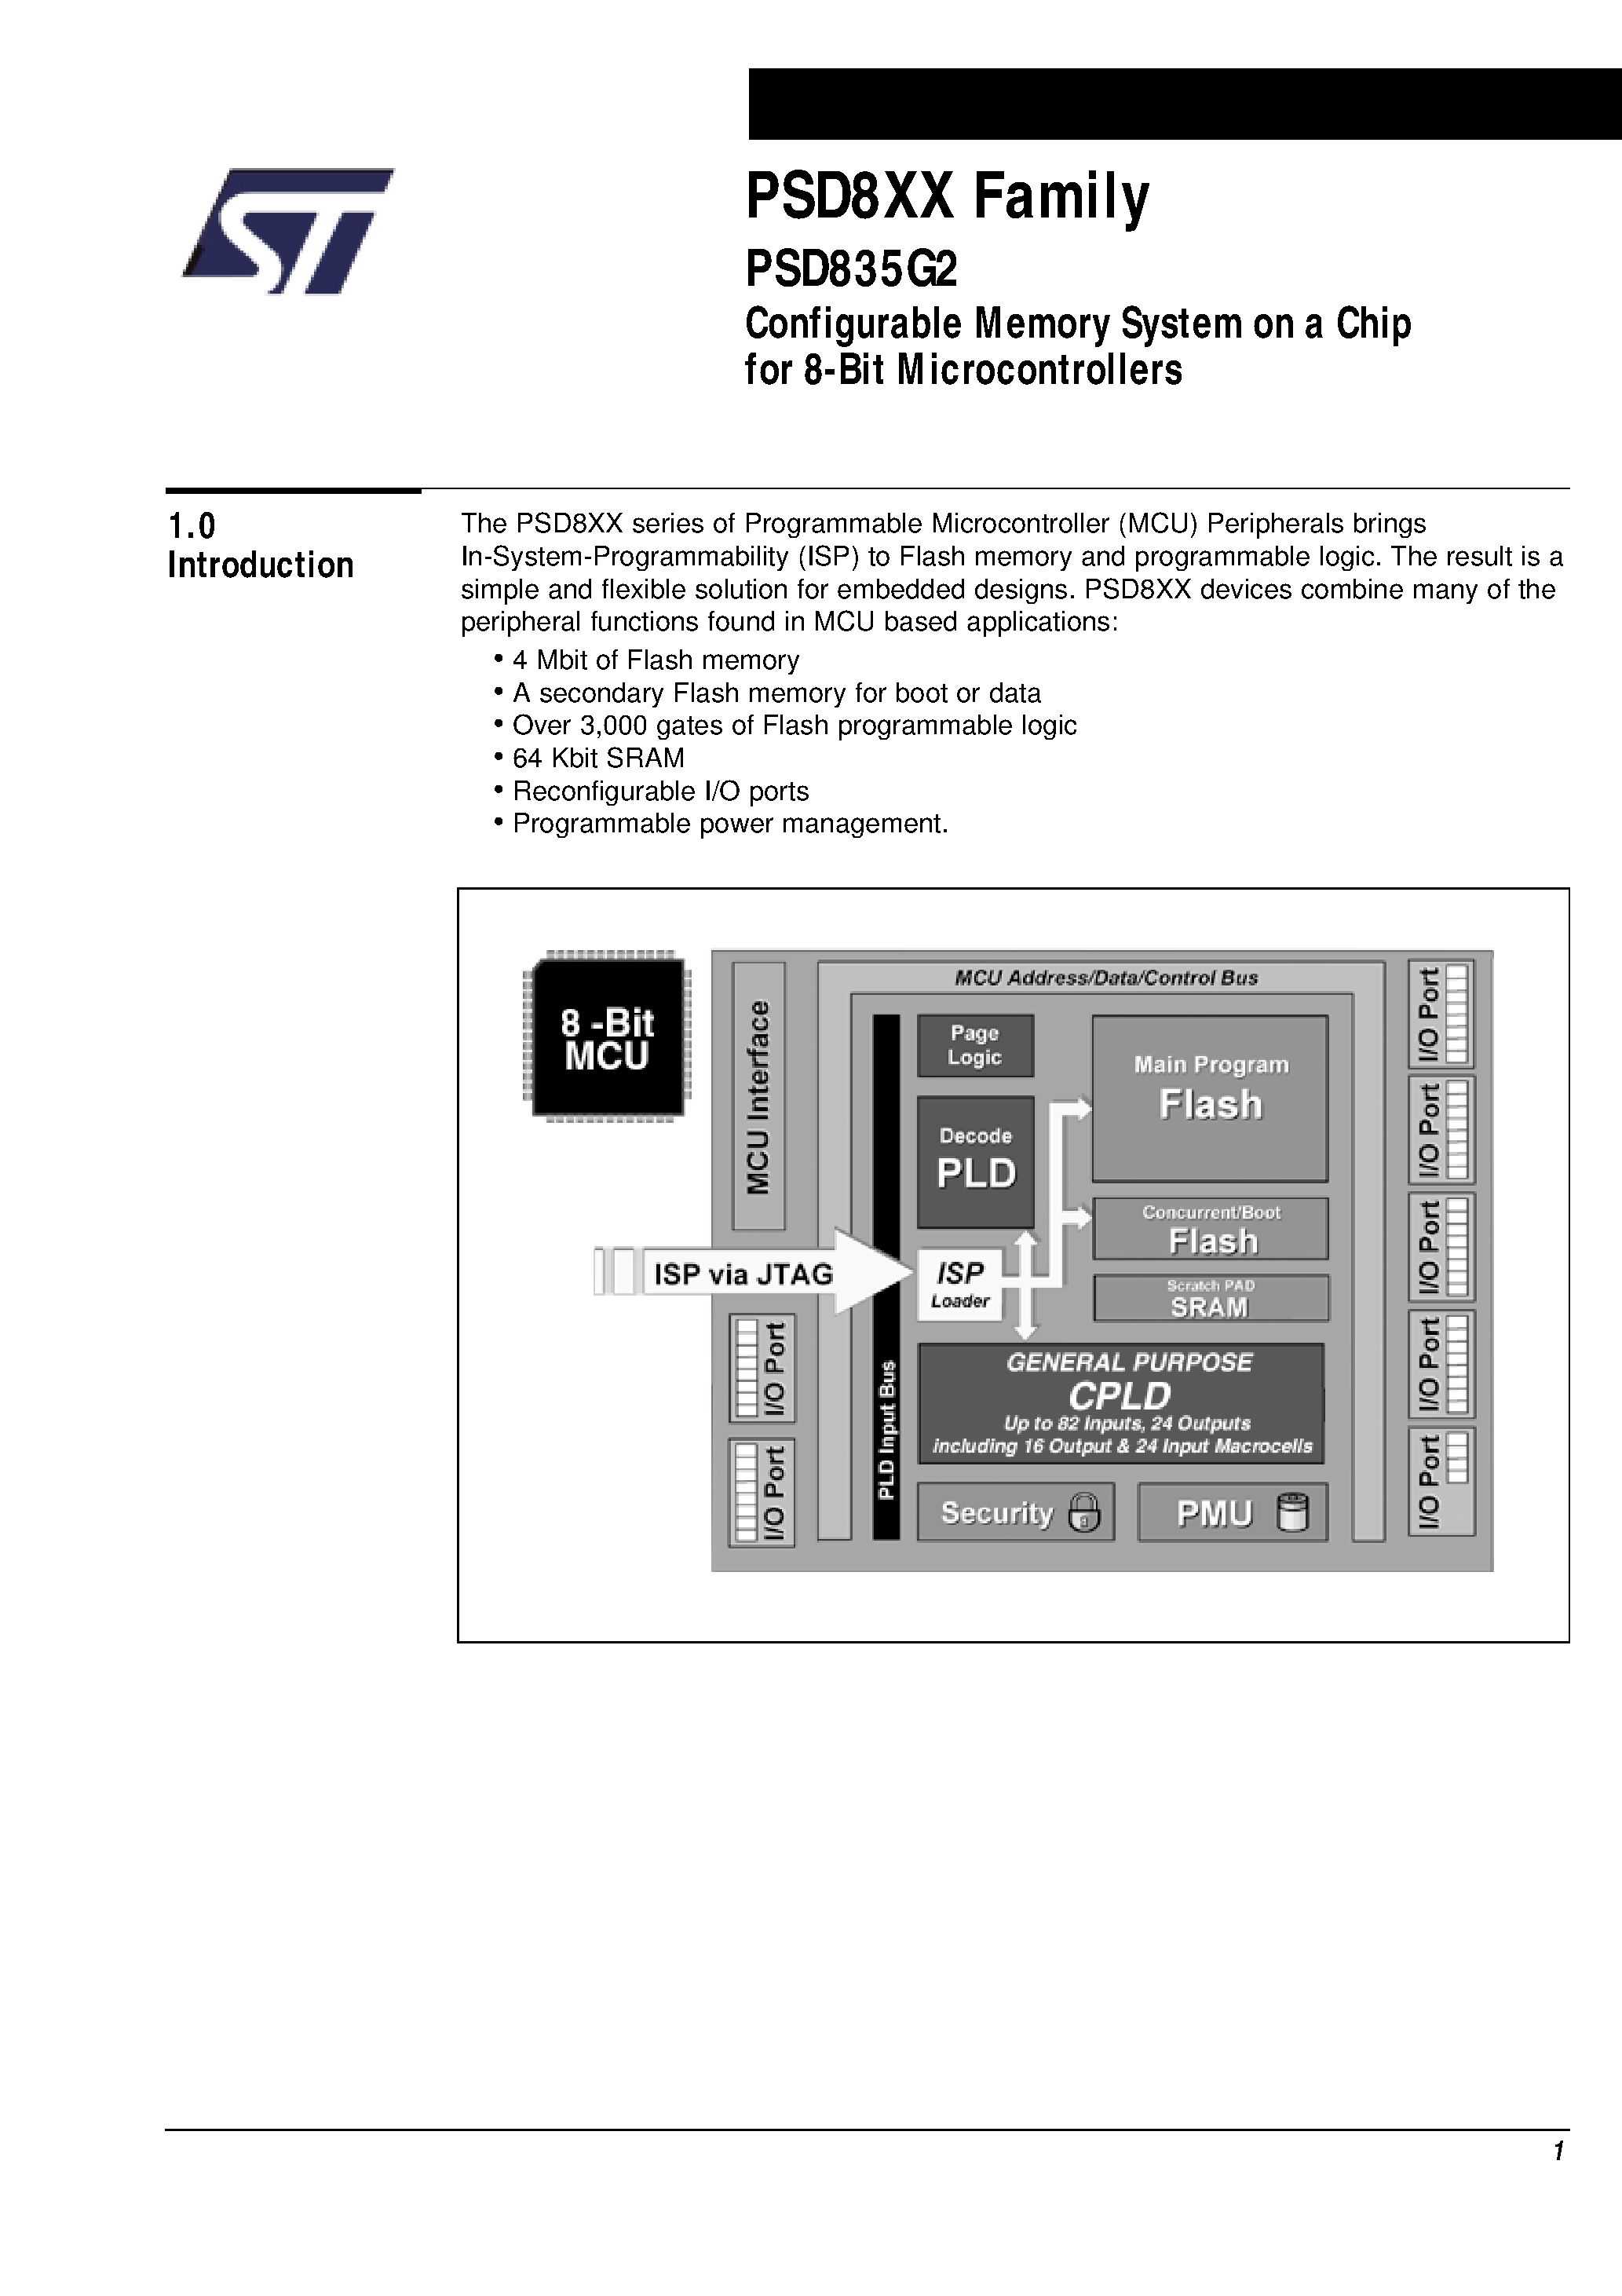 Datasheet PSD835F2V-A-20B81 - Configurable Memory System on a Chip for 8-Bit Microcontrollers page 2